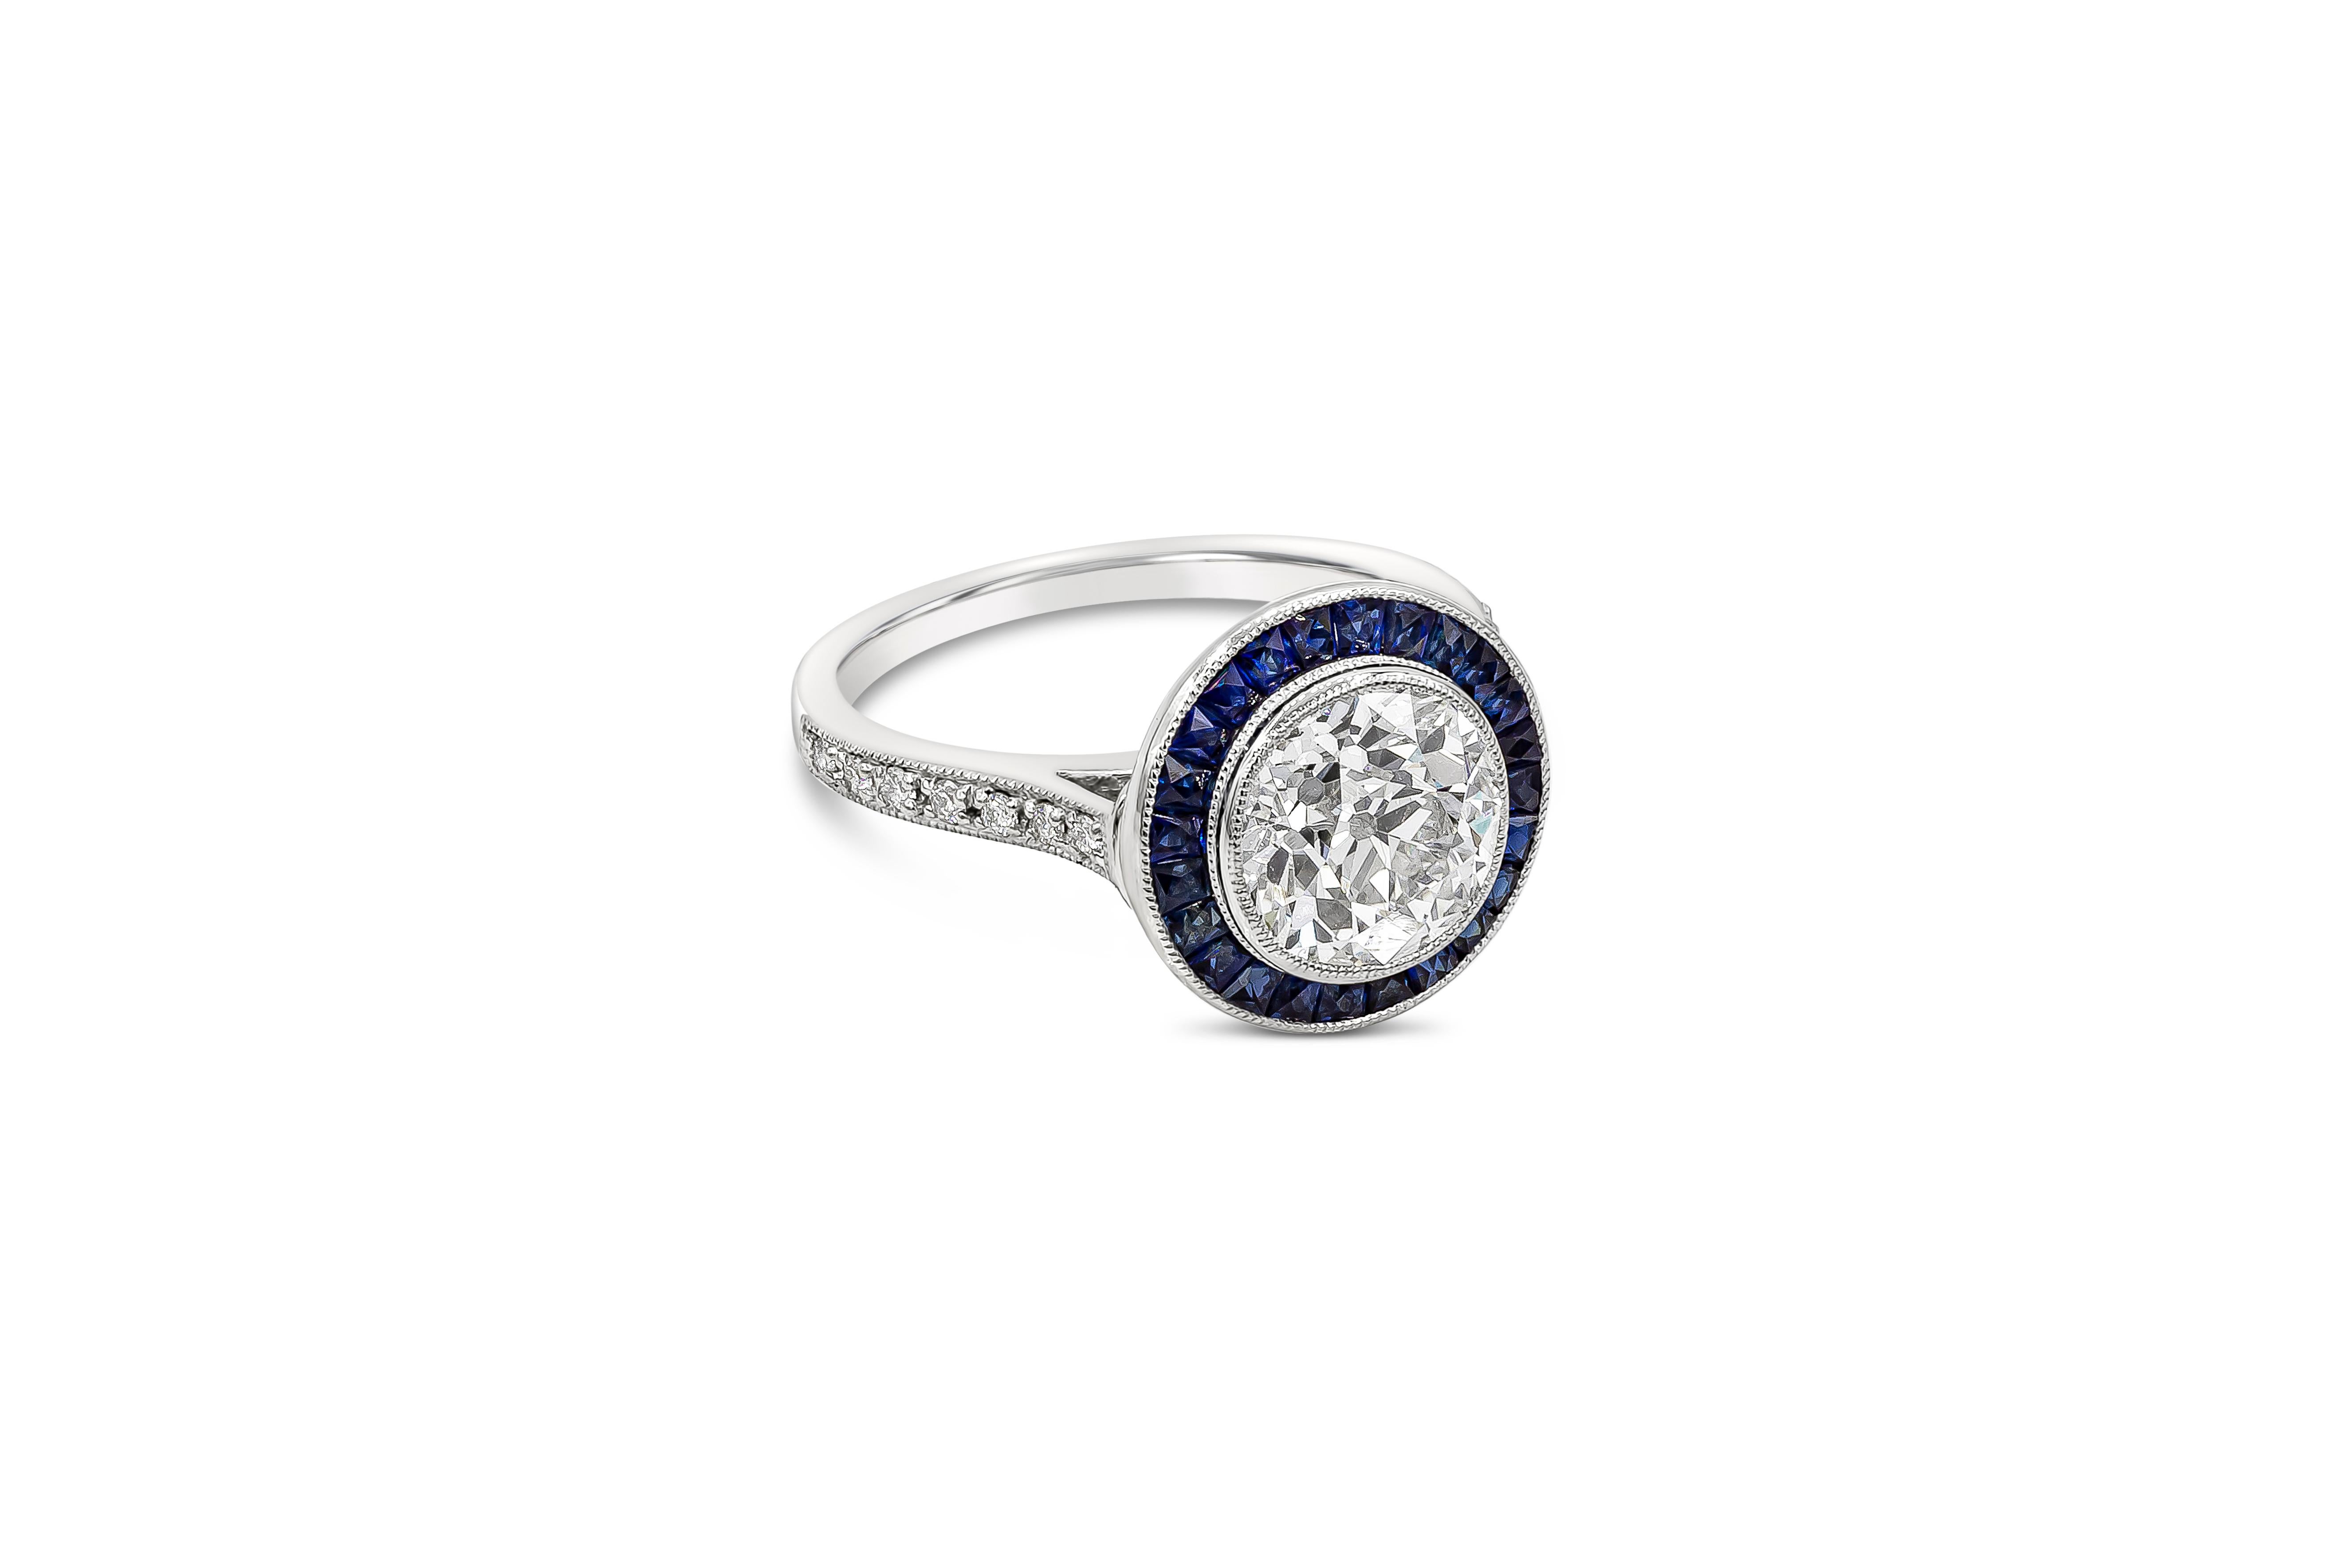 A vintage style engagement ring showcasing a GIA Certified 2.15 carat old European cut diamond, G Color and VS2 in Clarity. Center diamond is bezel set and surrounded by princess cut blue sapphires weighing 0.90 carats total. Center diamond is an